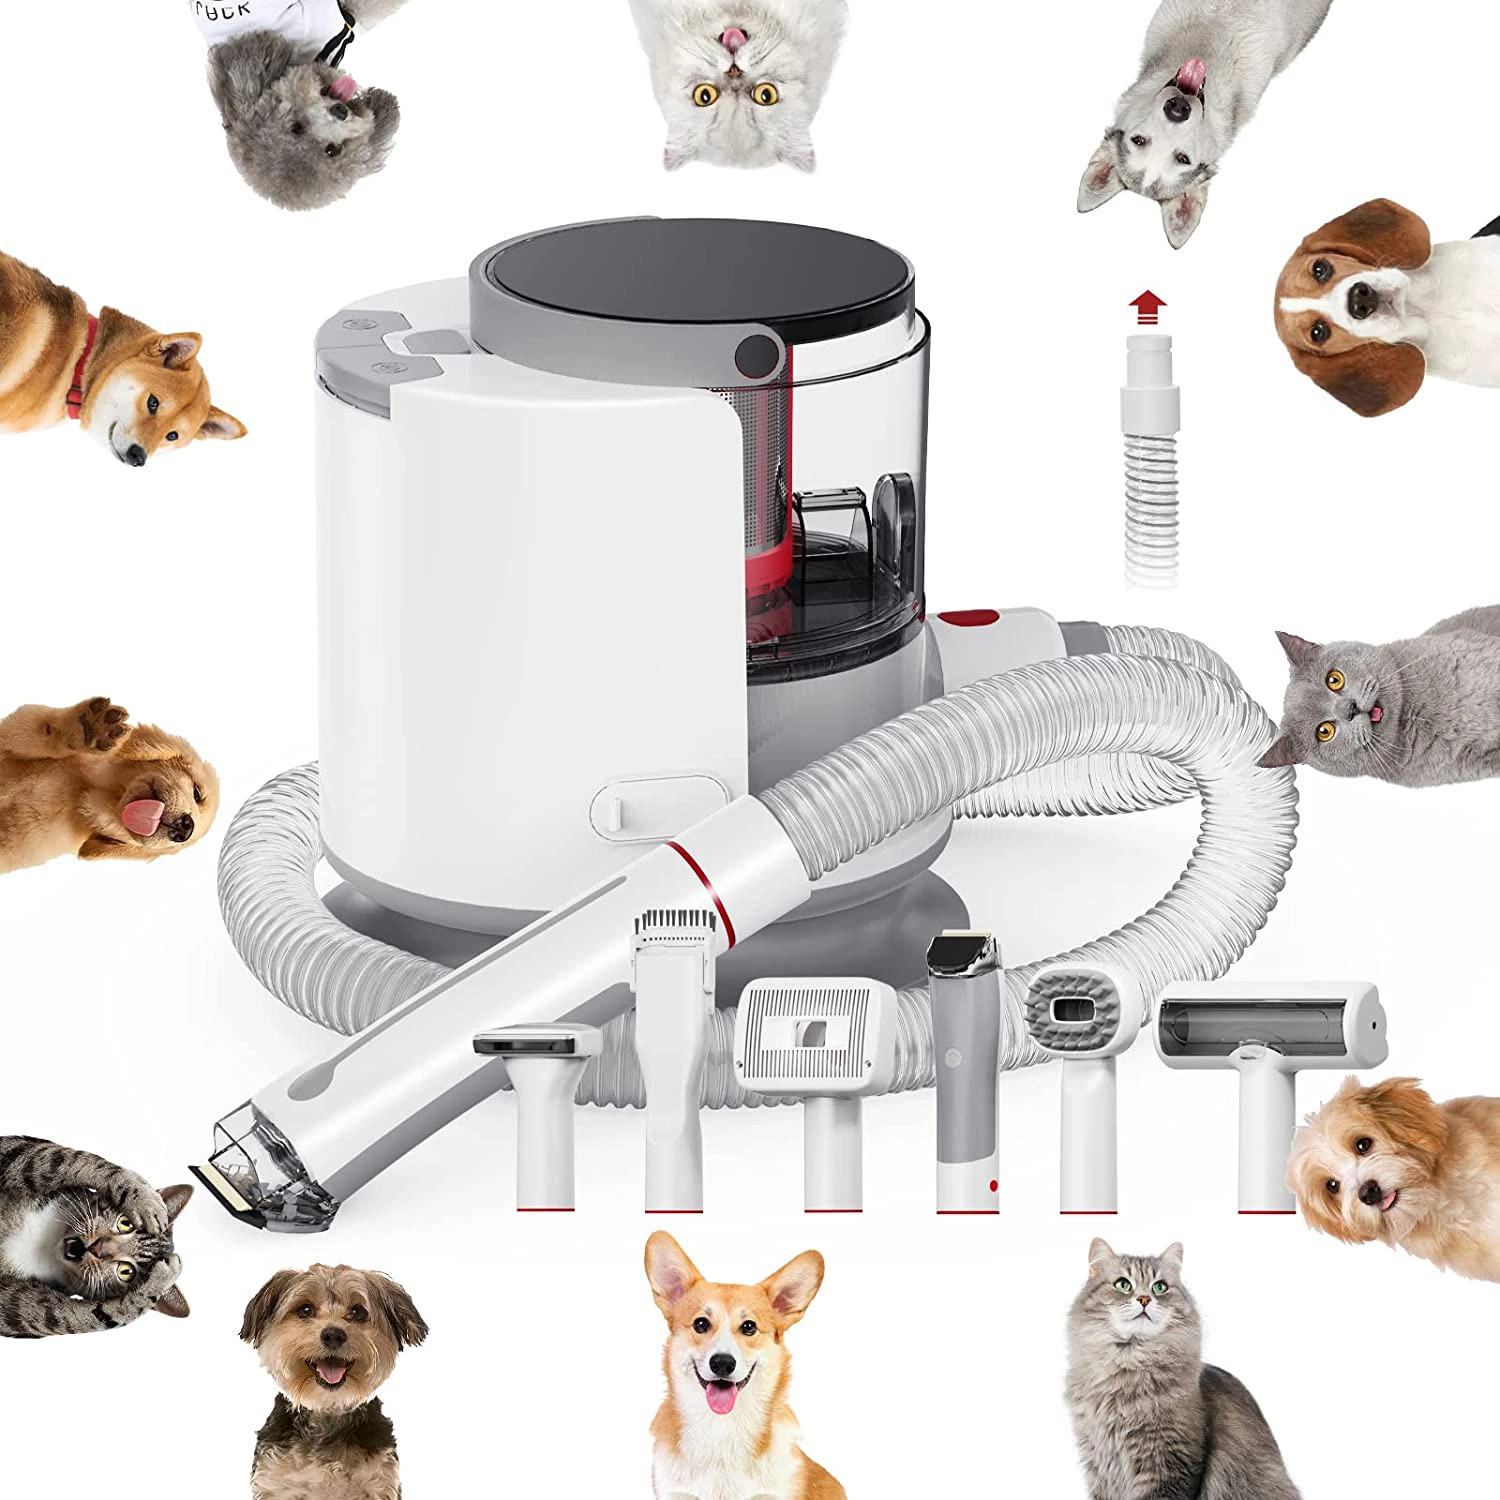 1.5L Multifuctional Electric Pet vacuum Cleaner with Grooming Tools Kits (Grooming Brush, Cleaning Brush, Nozzle, Deshedding Tool, Hair Clipper)